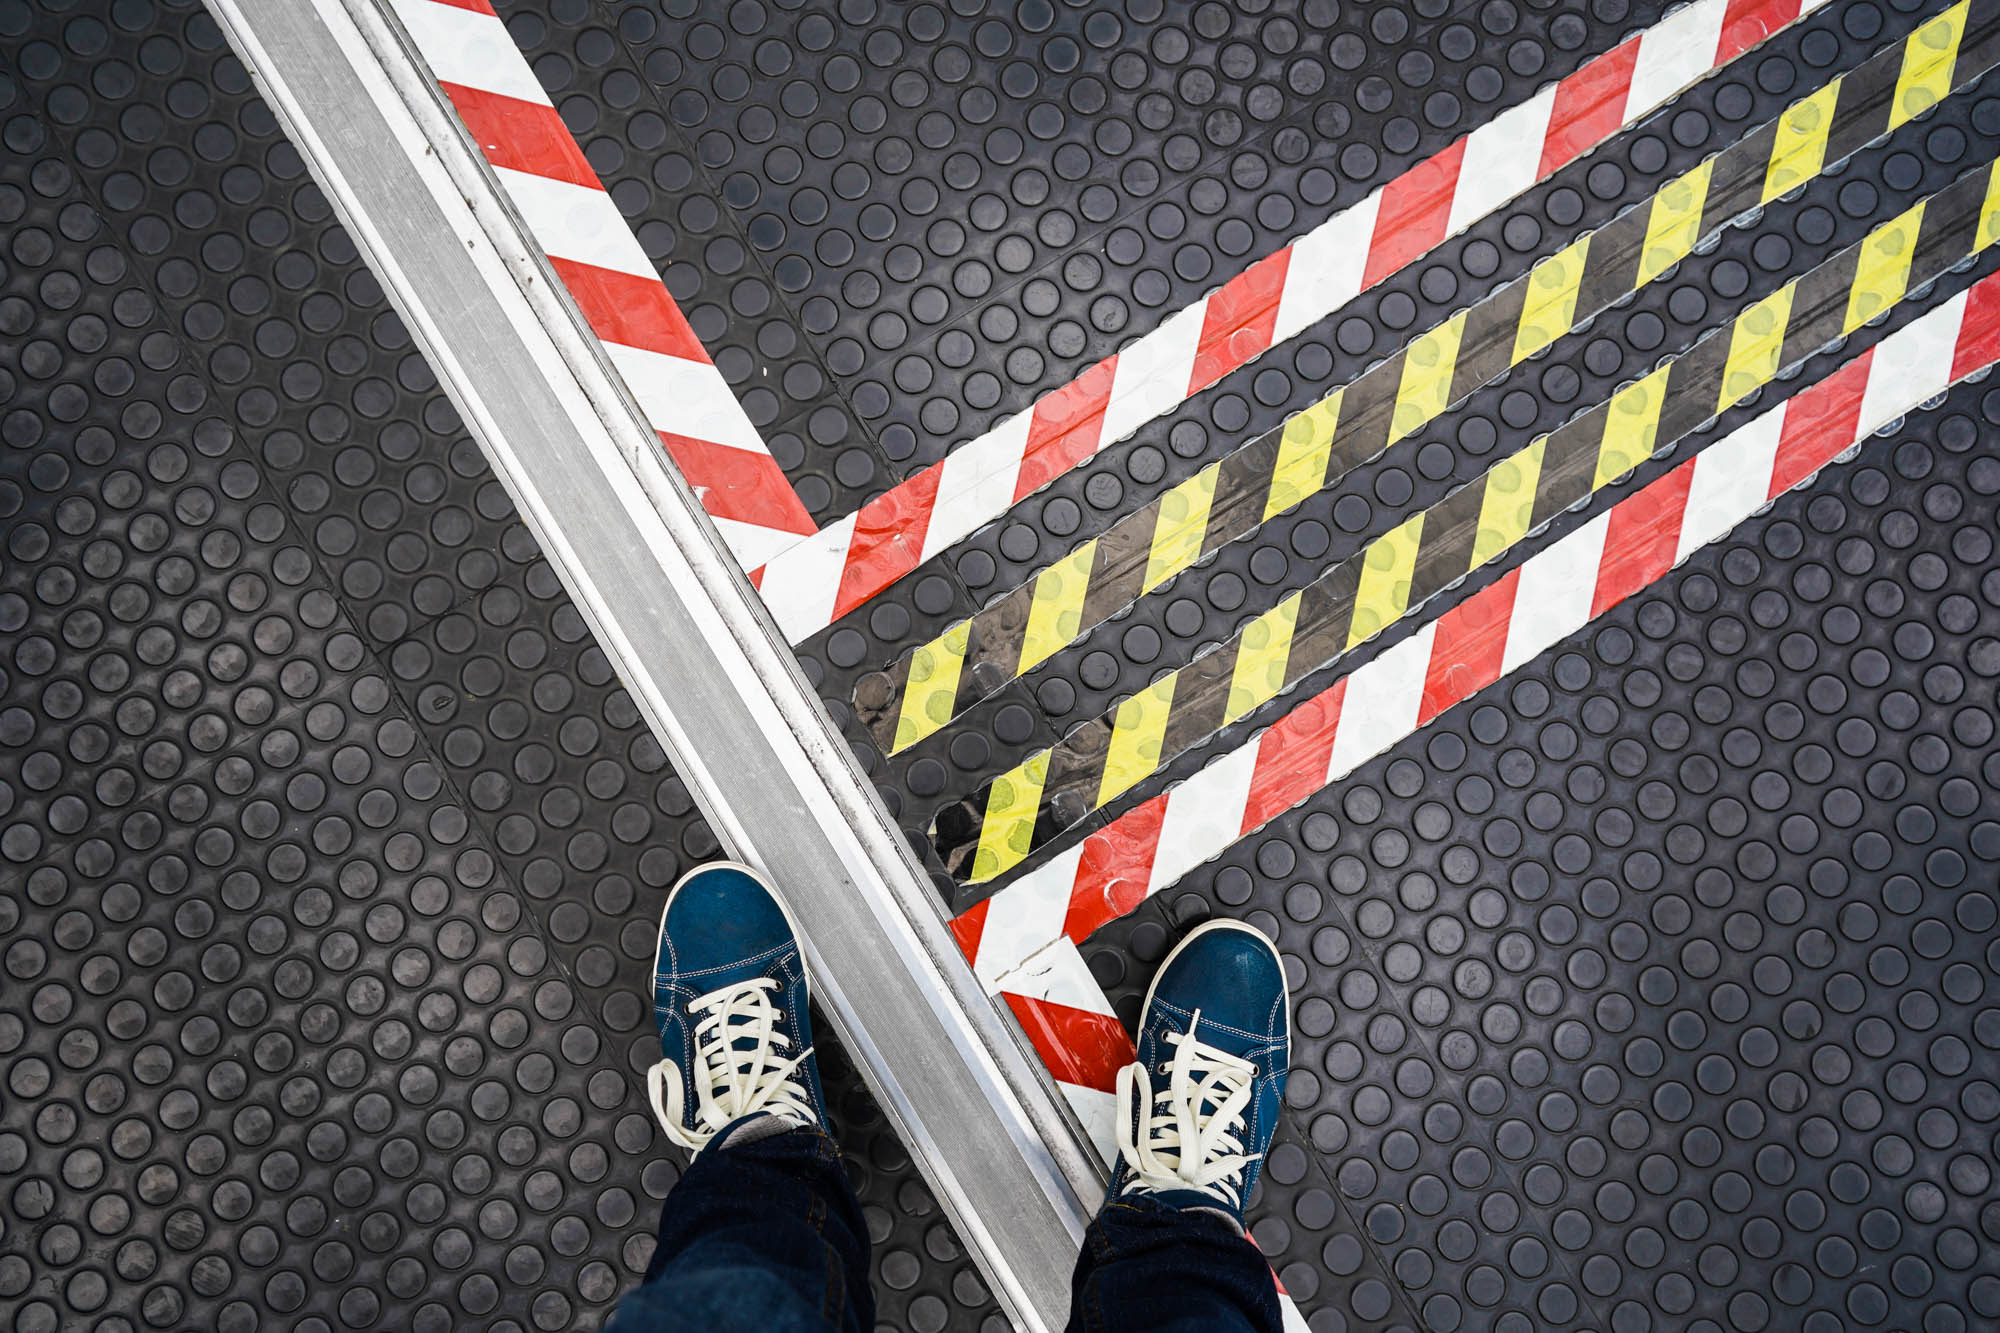  Red-white and red-yellow tape on floor